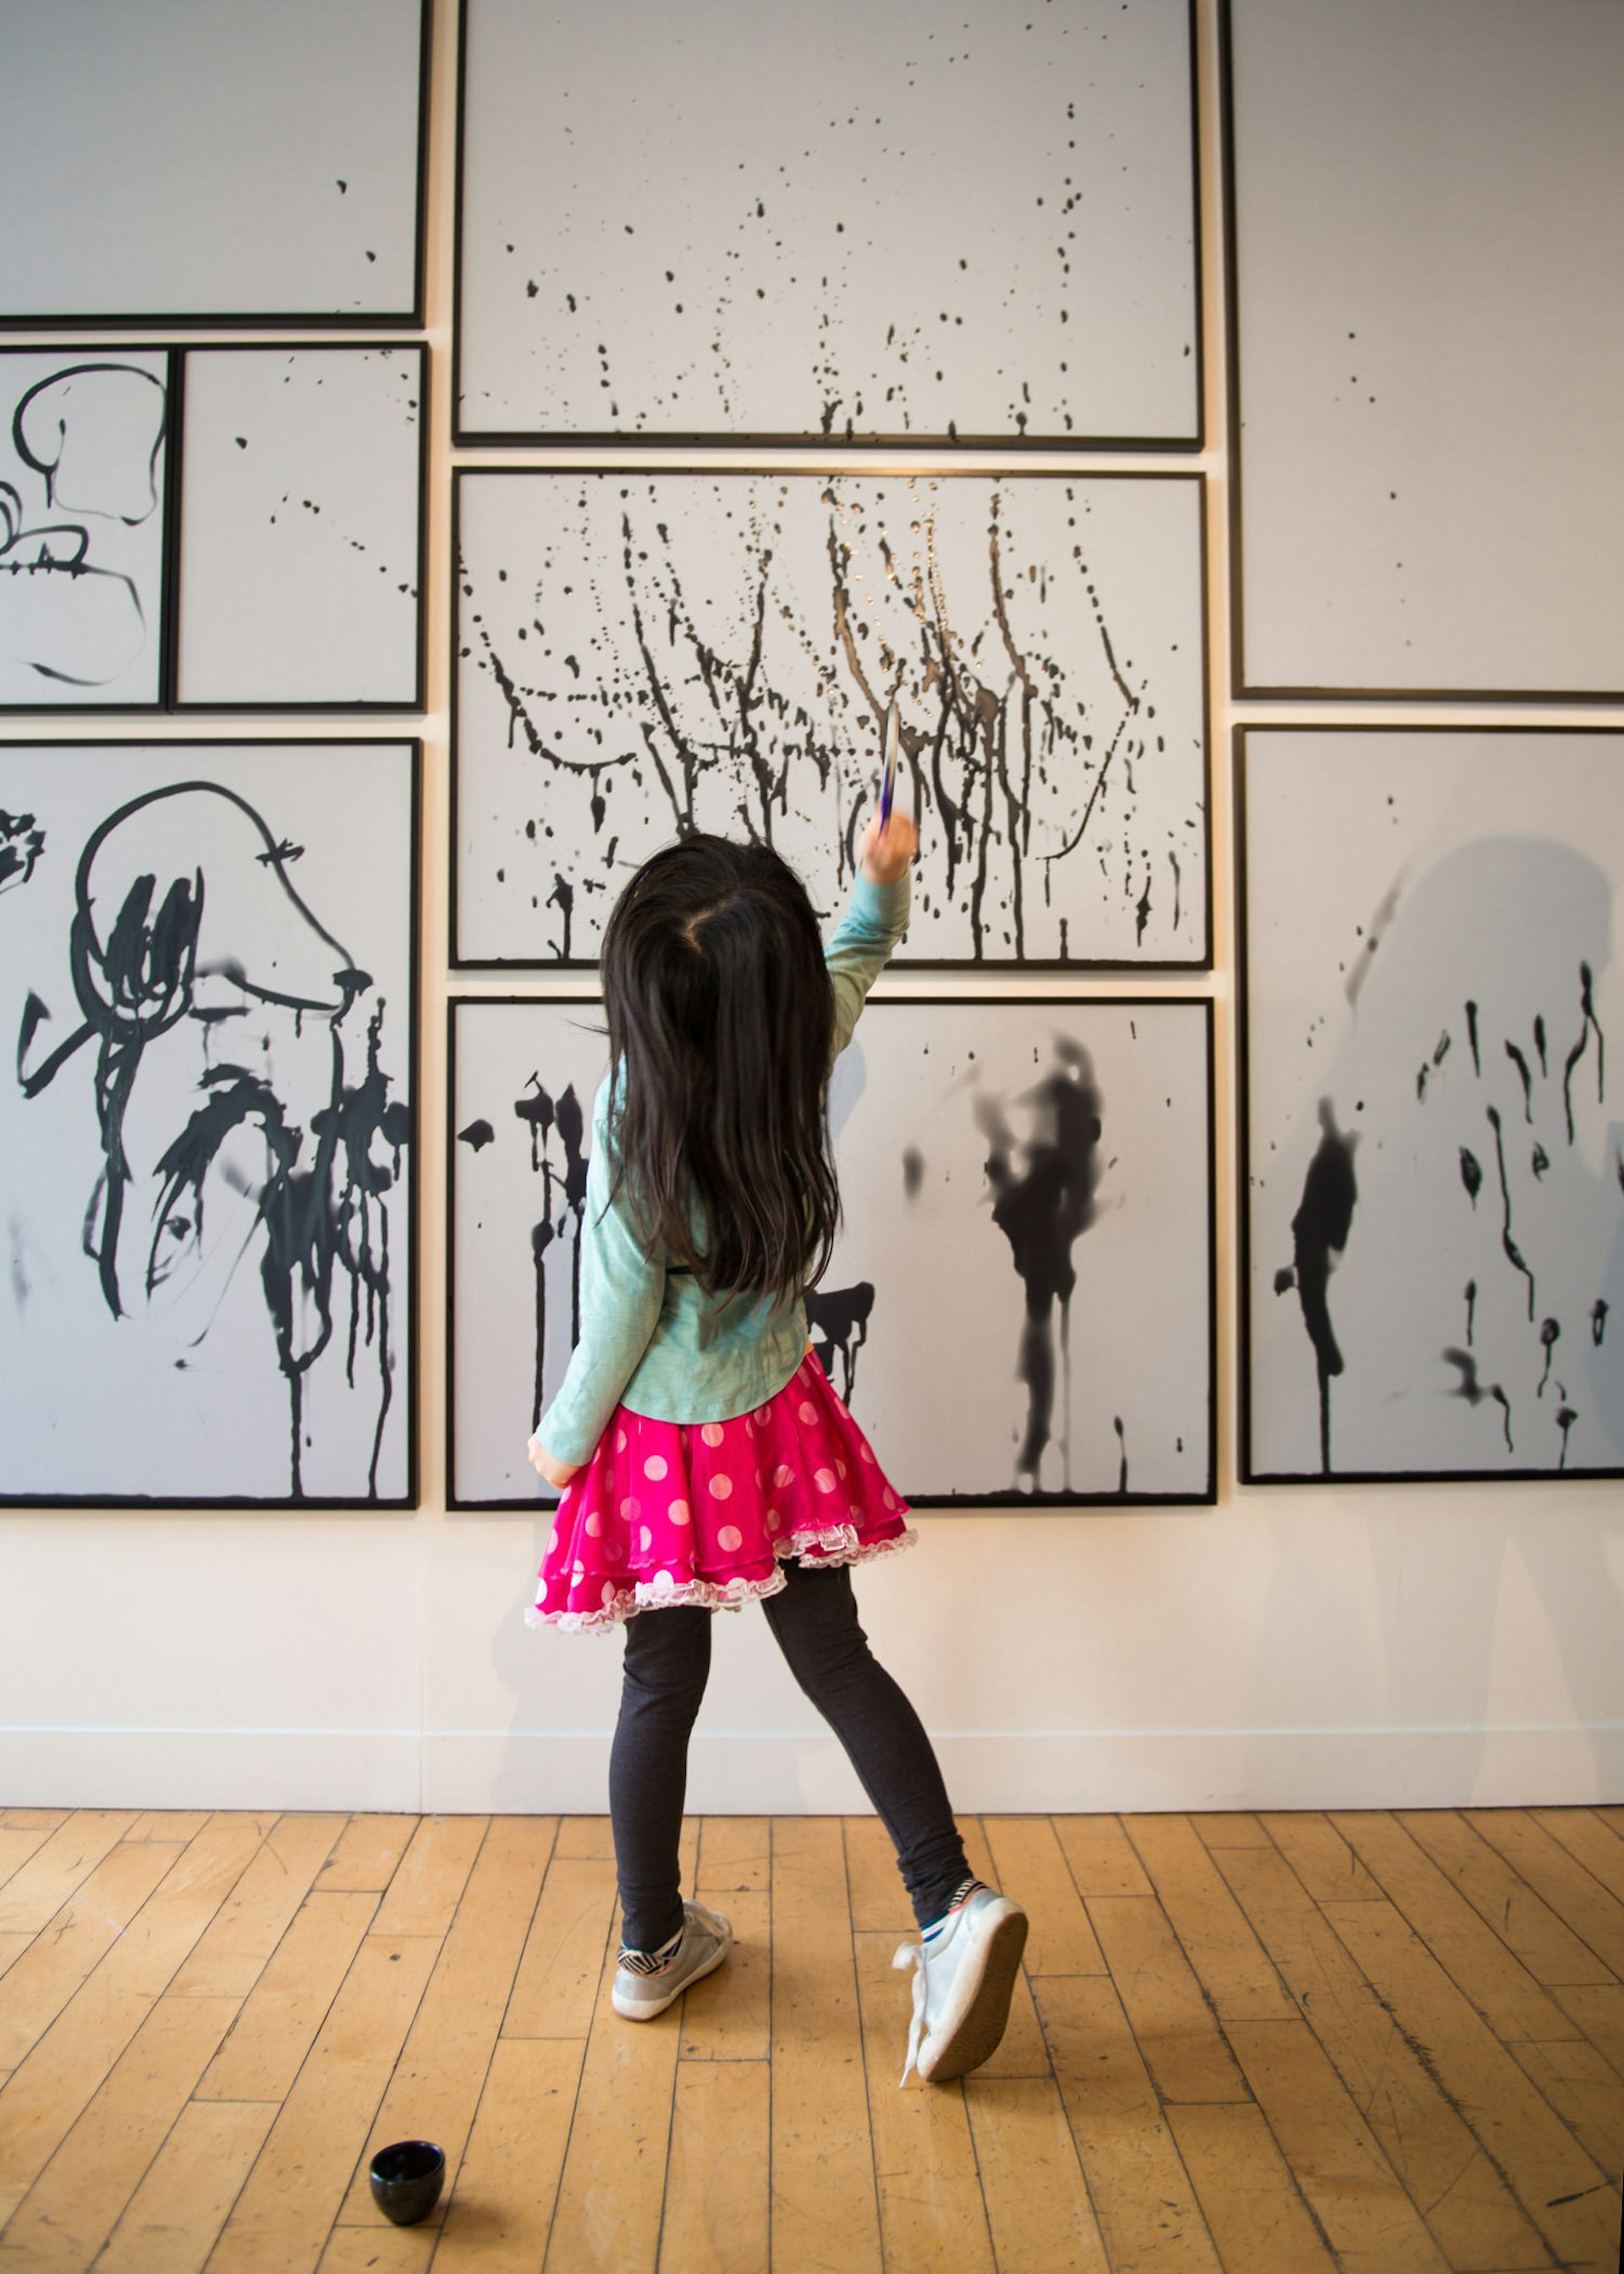 A child draws on the walls at Vancouver Art Gallery – as part of an interactive activity © Anita Bonnarens